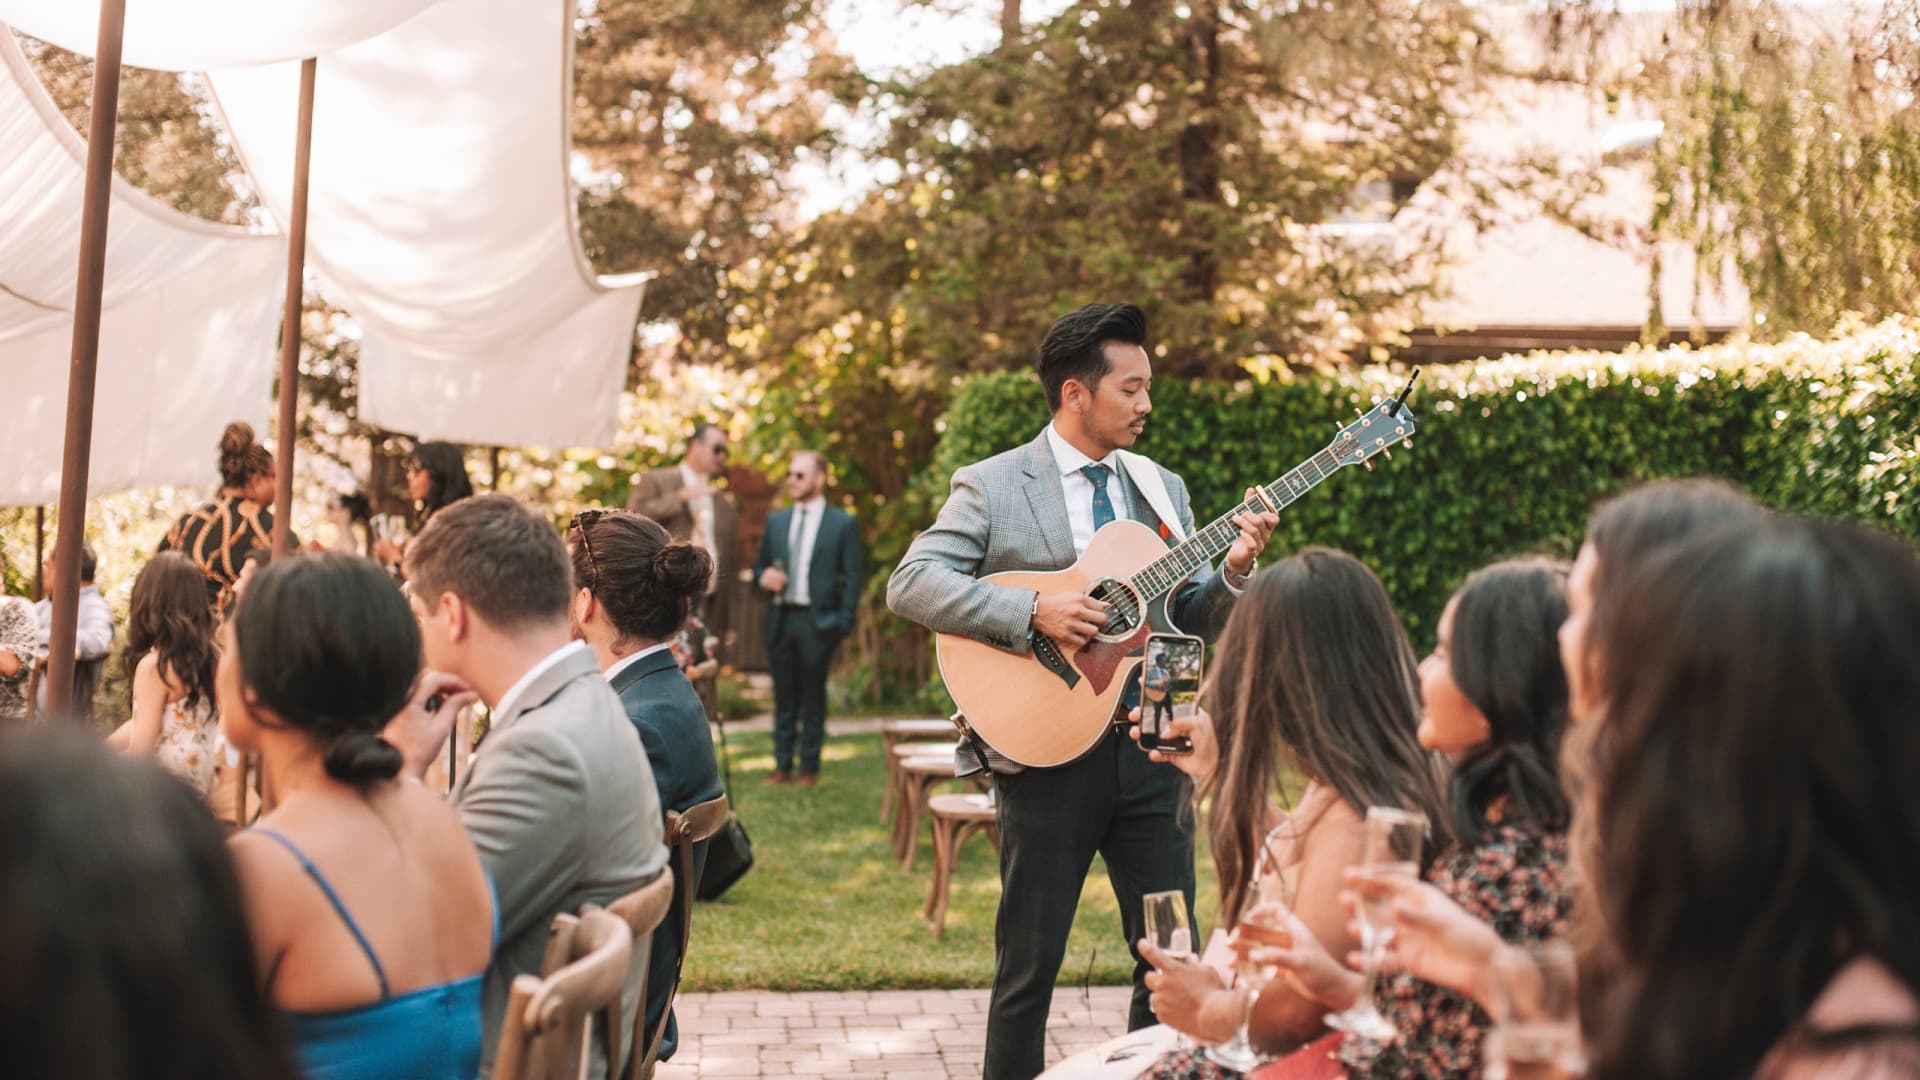 Moses Lin is invested in growing his wedding guitarist clientele. He hopes to break $200,000 in bookings within a year and even play abroad.